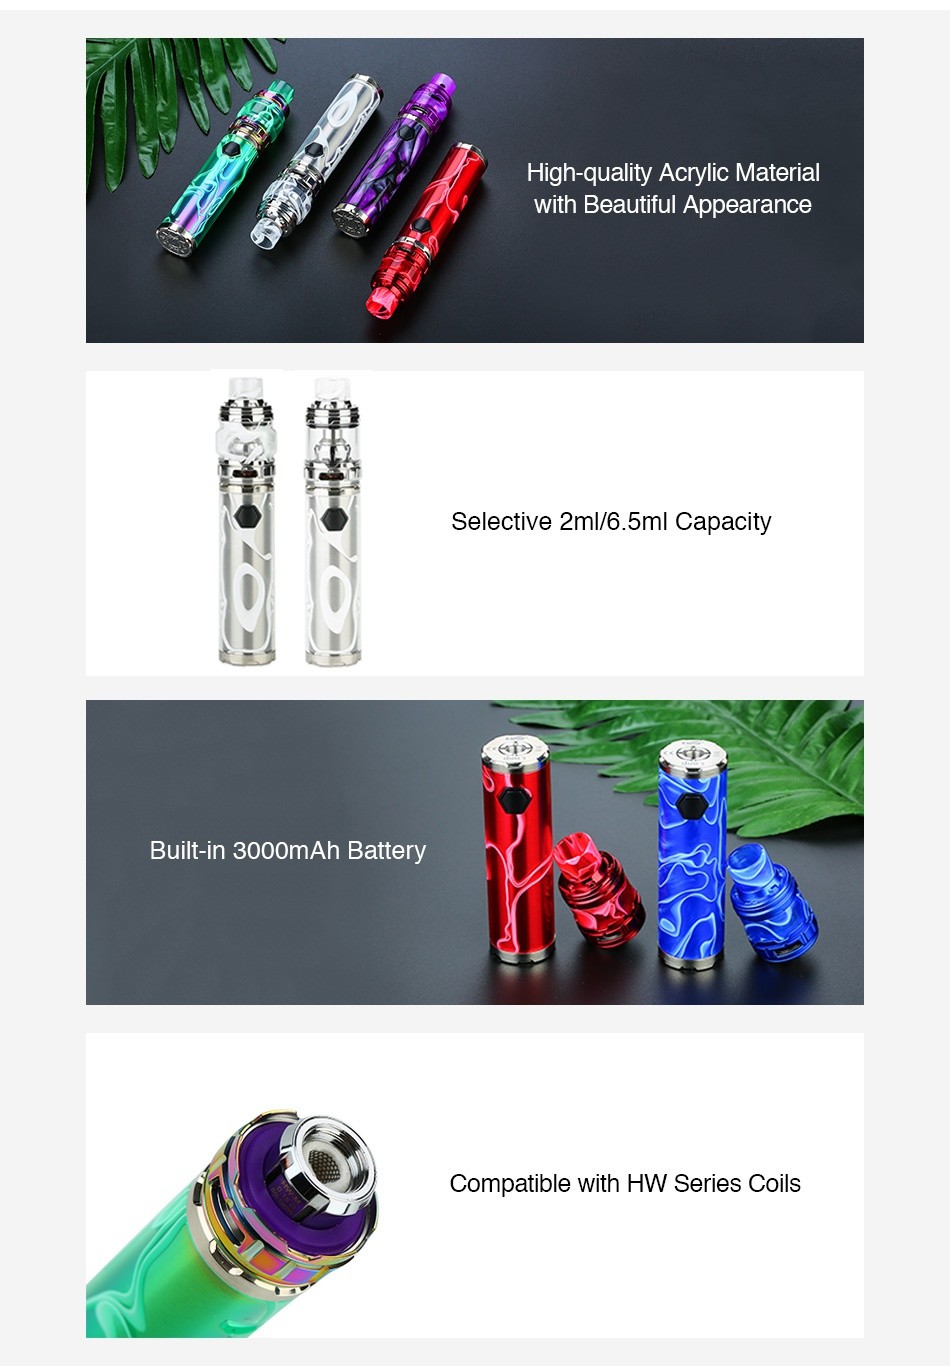 Eleaf iJust 3 Starter Kit New Color Version 3000mAh High quality Acrylic Material with Beautiful Appearance Selective 2m 6 5ml Capacity Built in 3000mAh Battery Compatible with Hw series coils